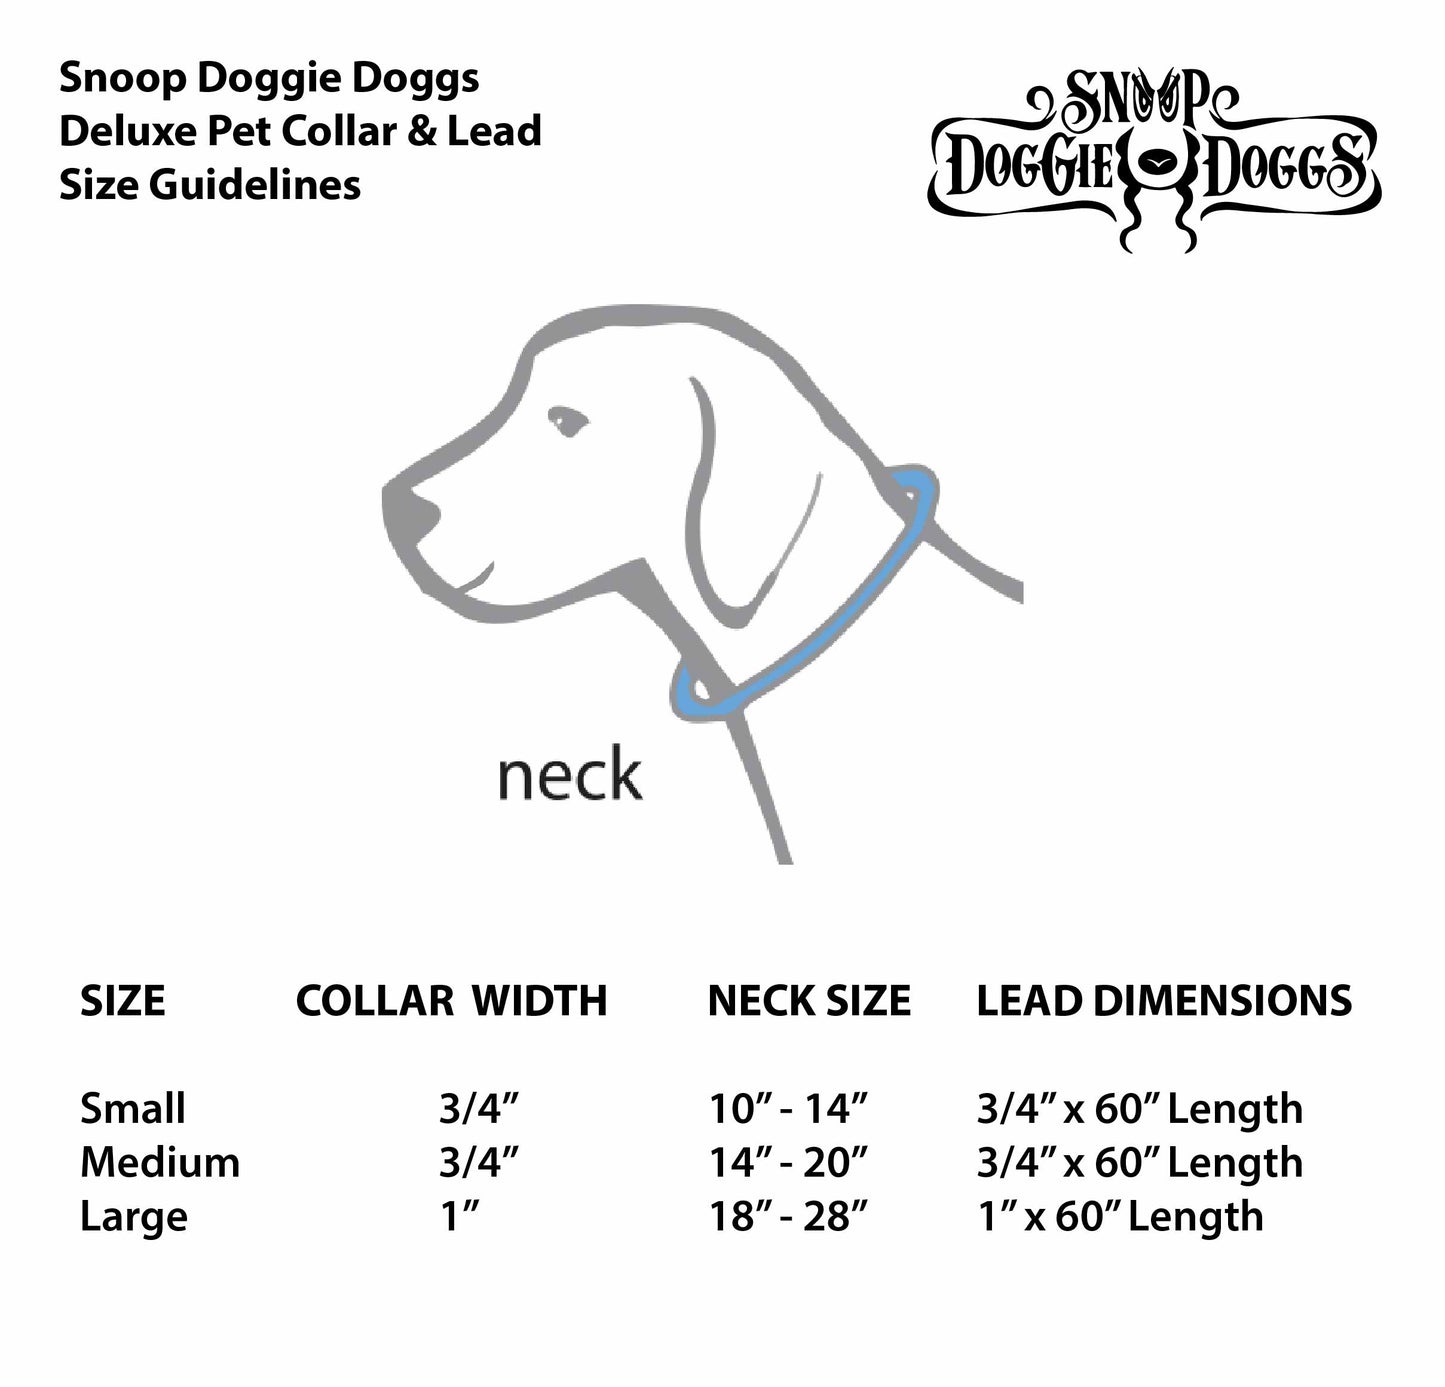 Off The Chain Deluxe Pet Collar size chart for sizes Small, Medium and Large.